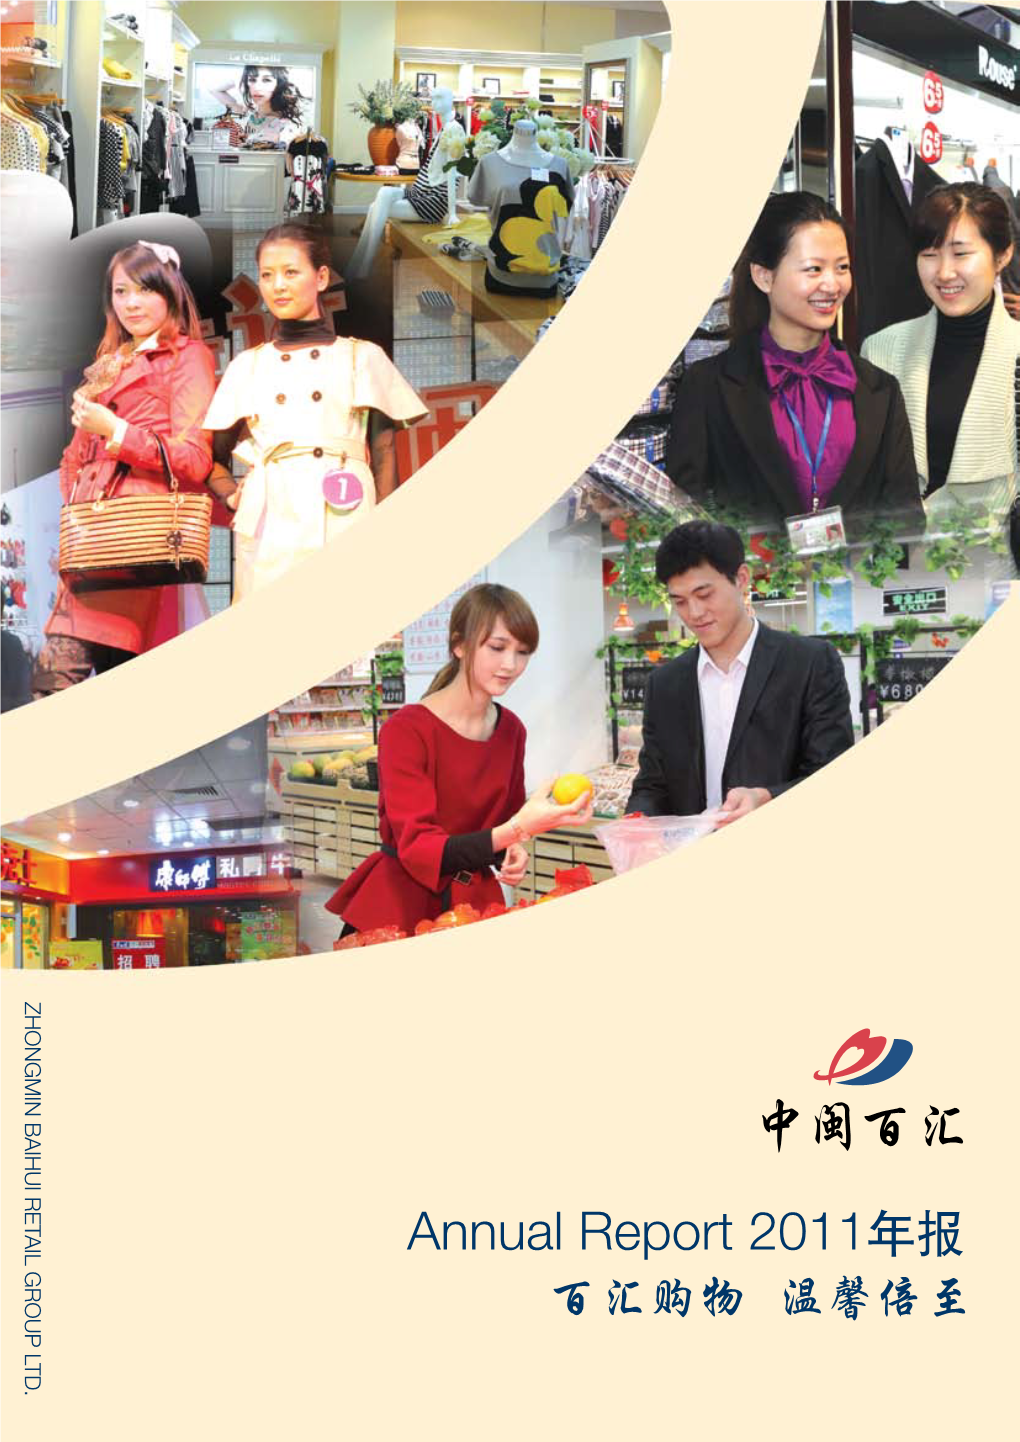 Download Annual Report 2011